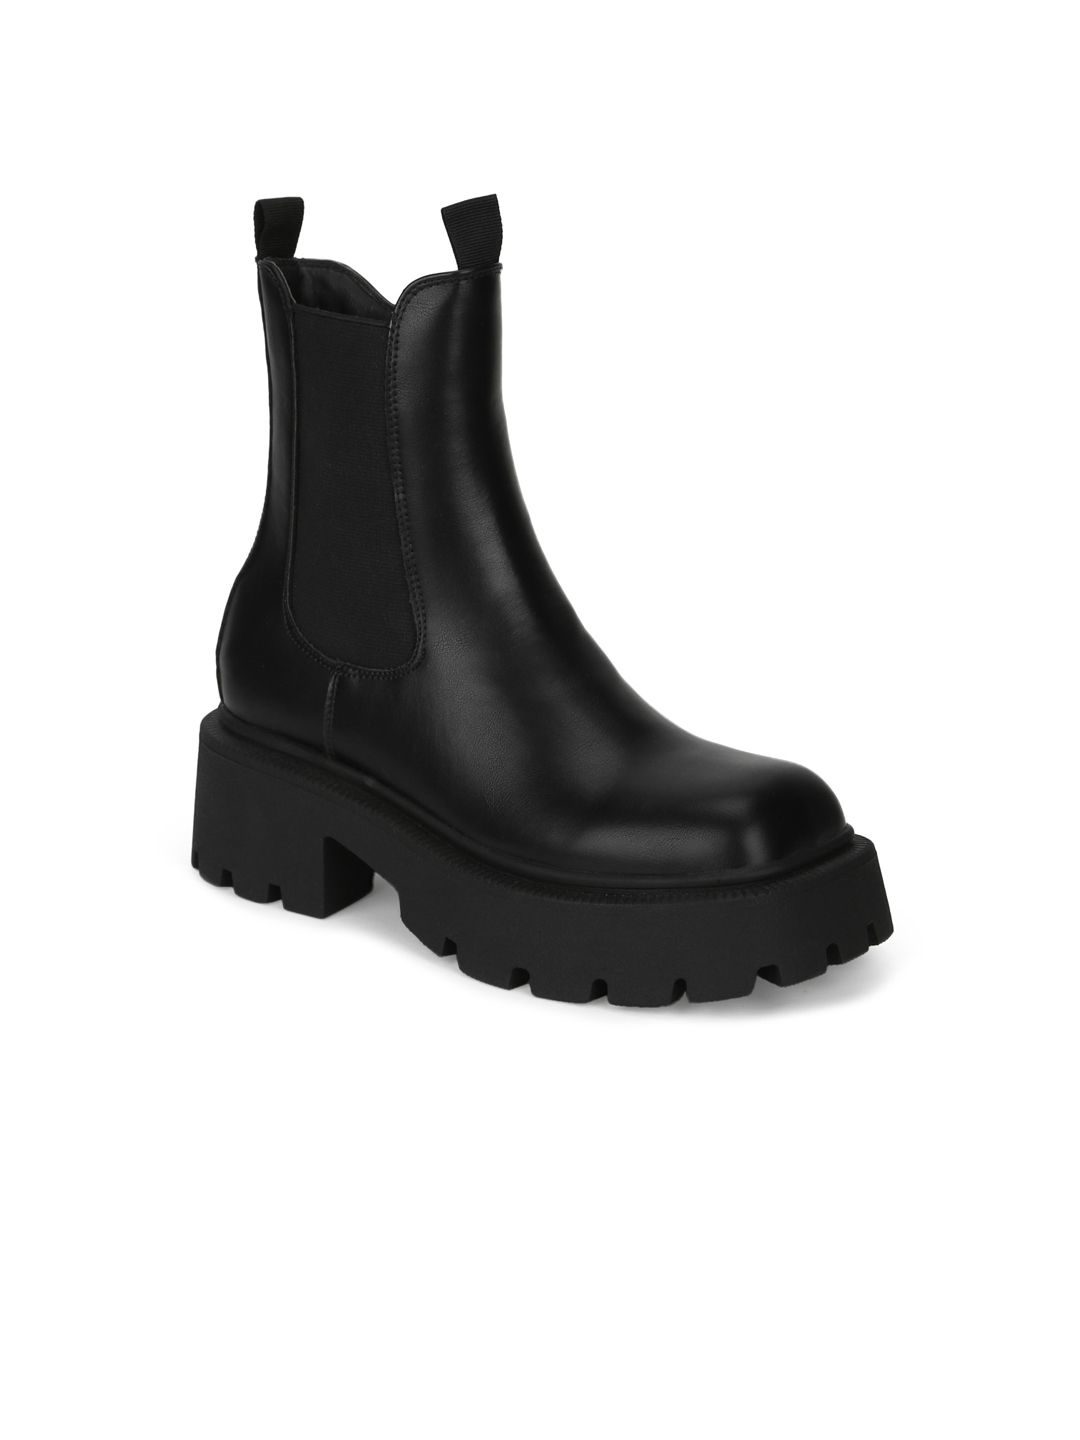 Truffle Collection Black PU Platform Heeled Boots Price in India